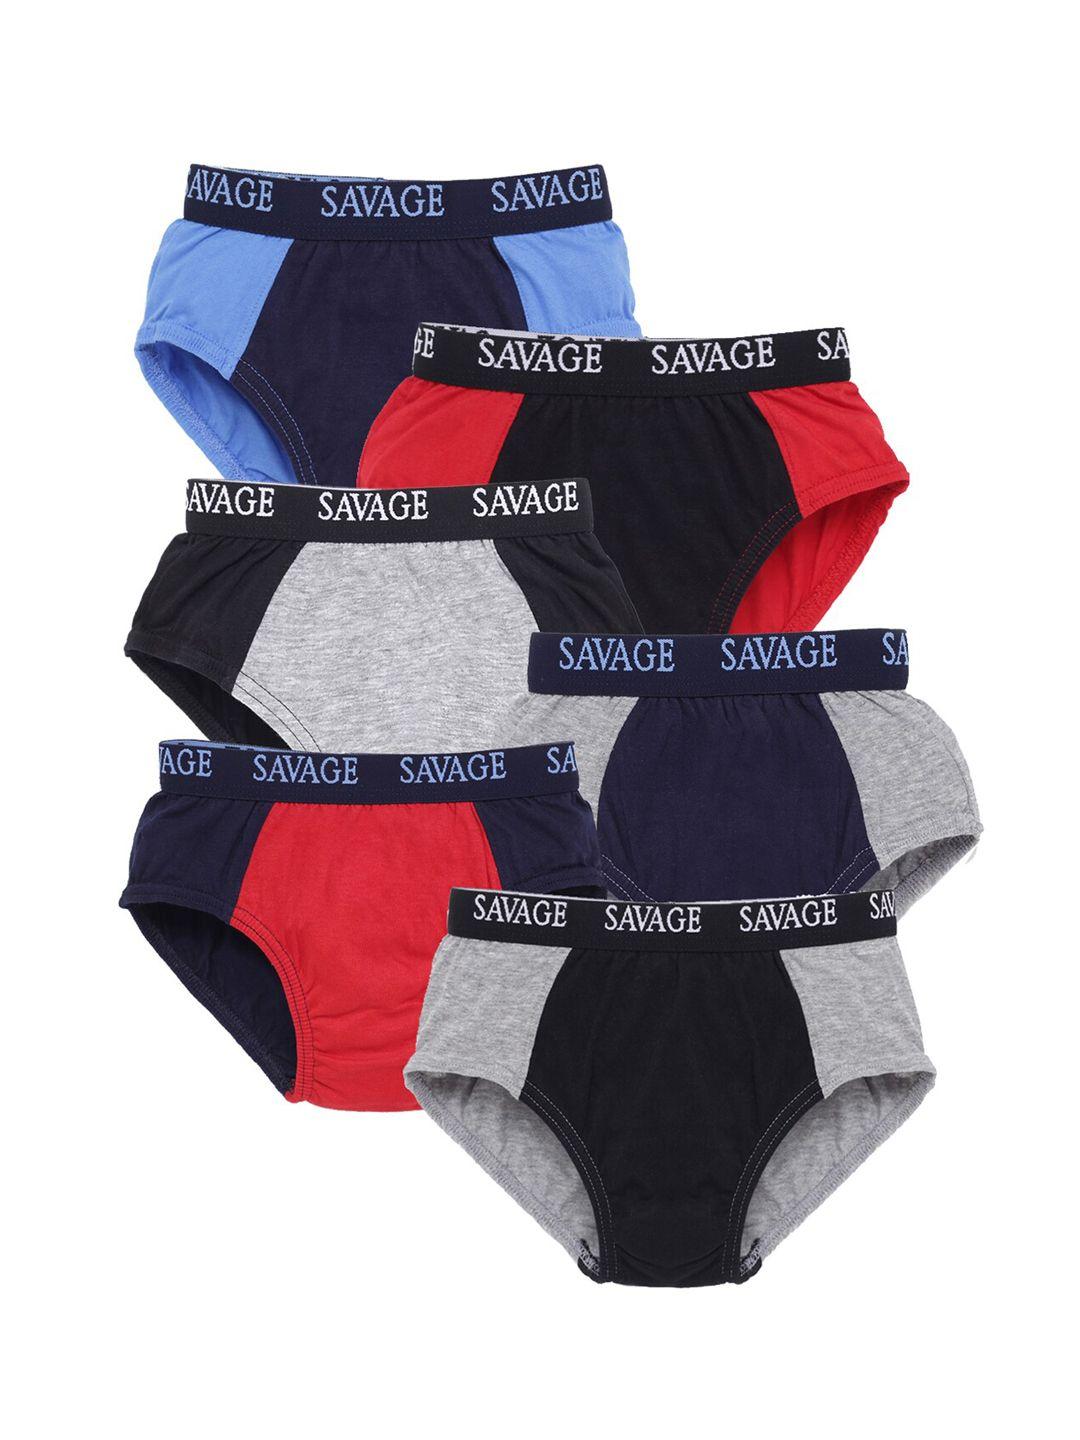 savage pack of 6 colourblocked cotton briefs